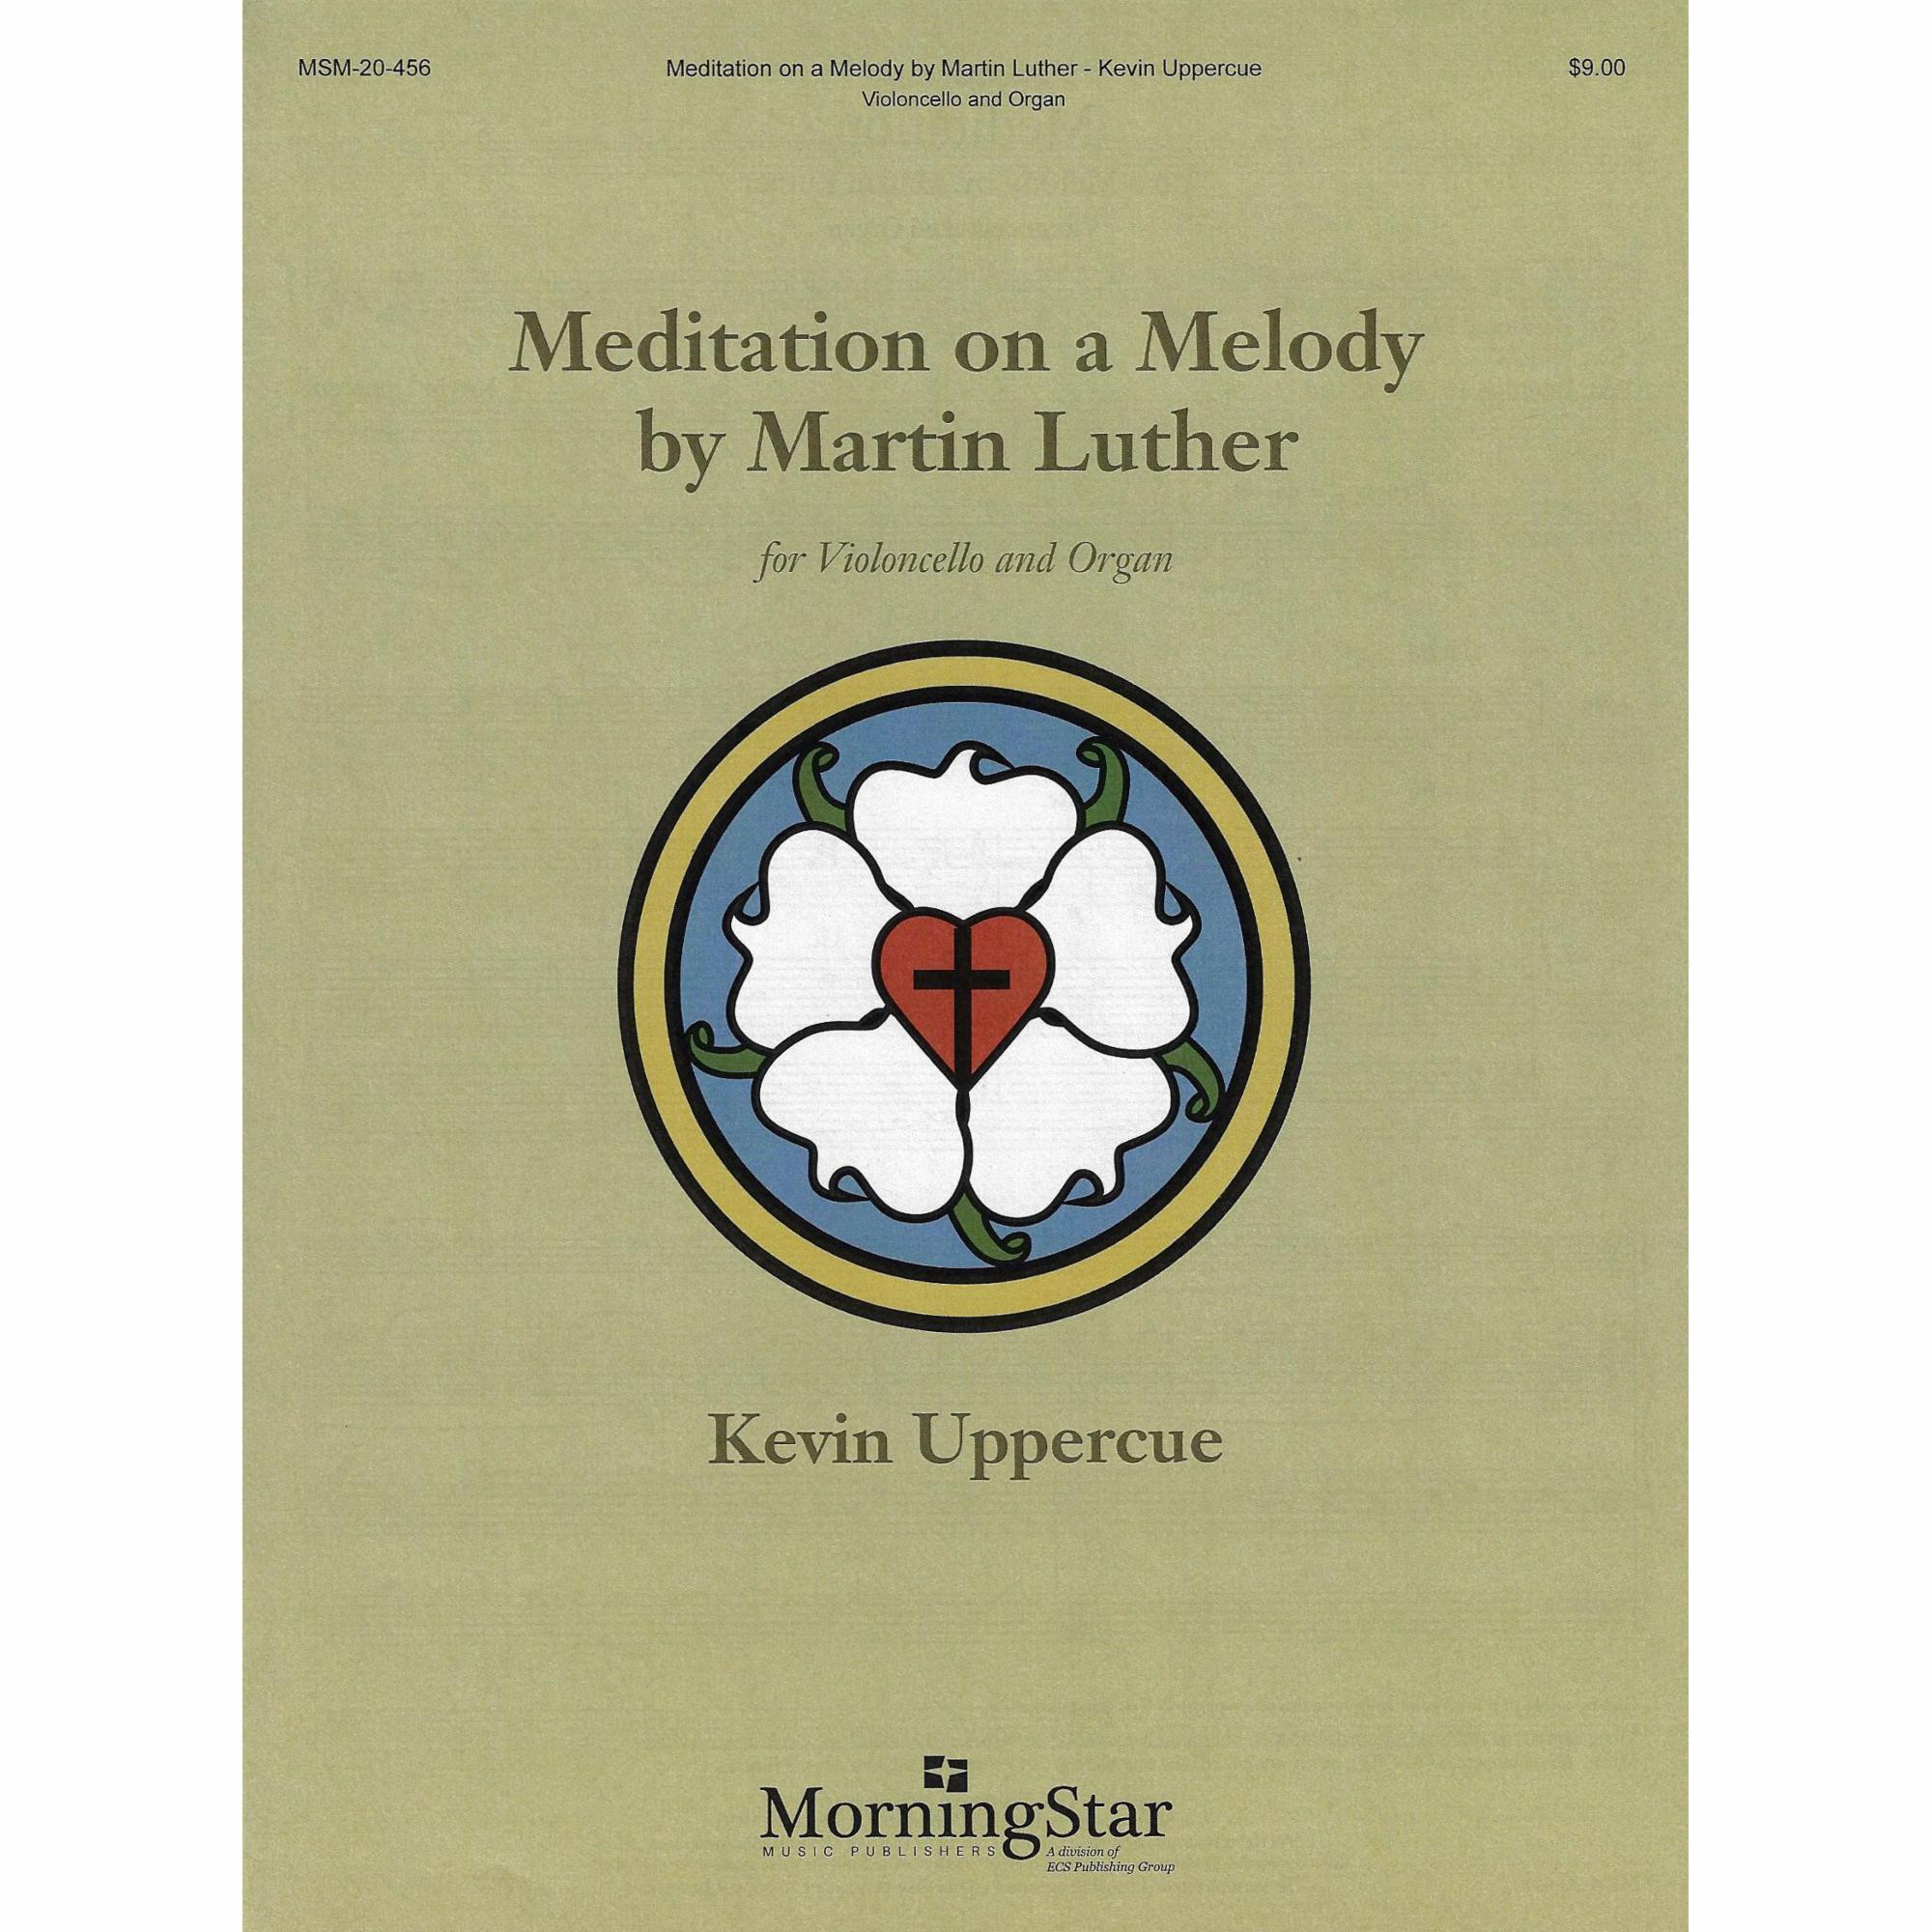 Meditation on a Melody by Martin Luther for Cello and Organ